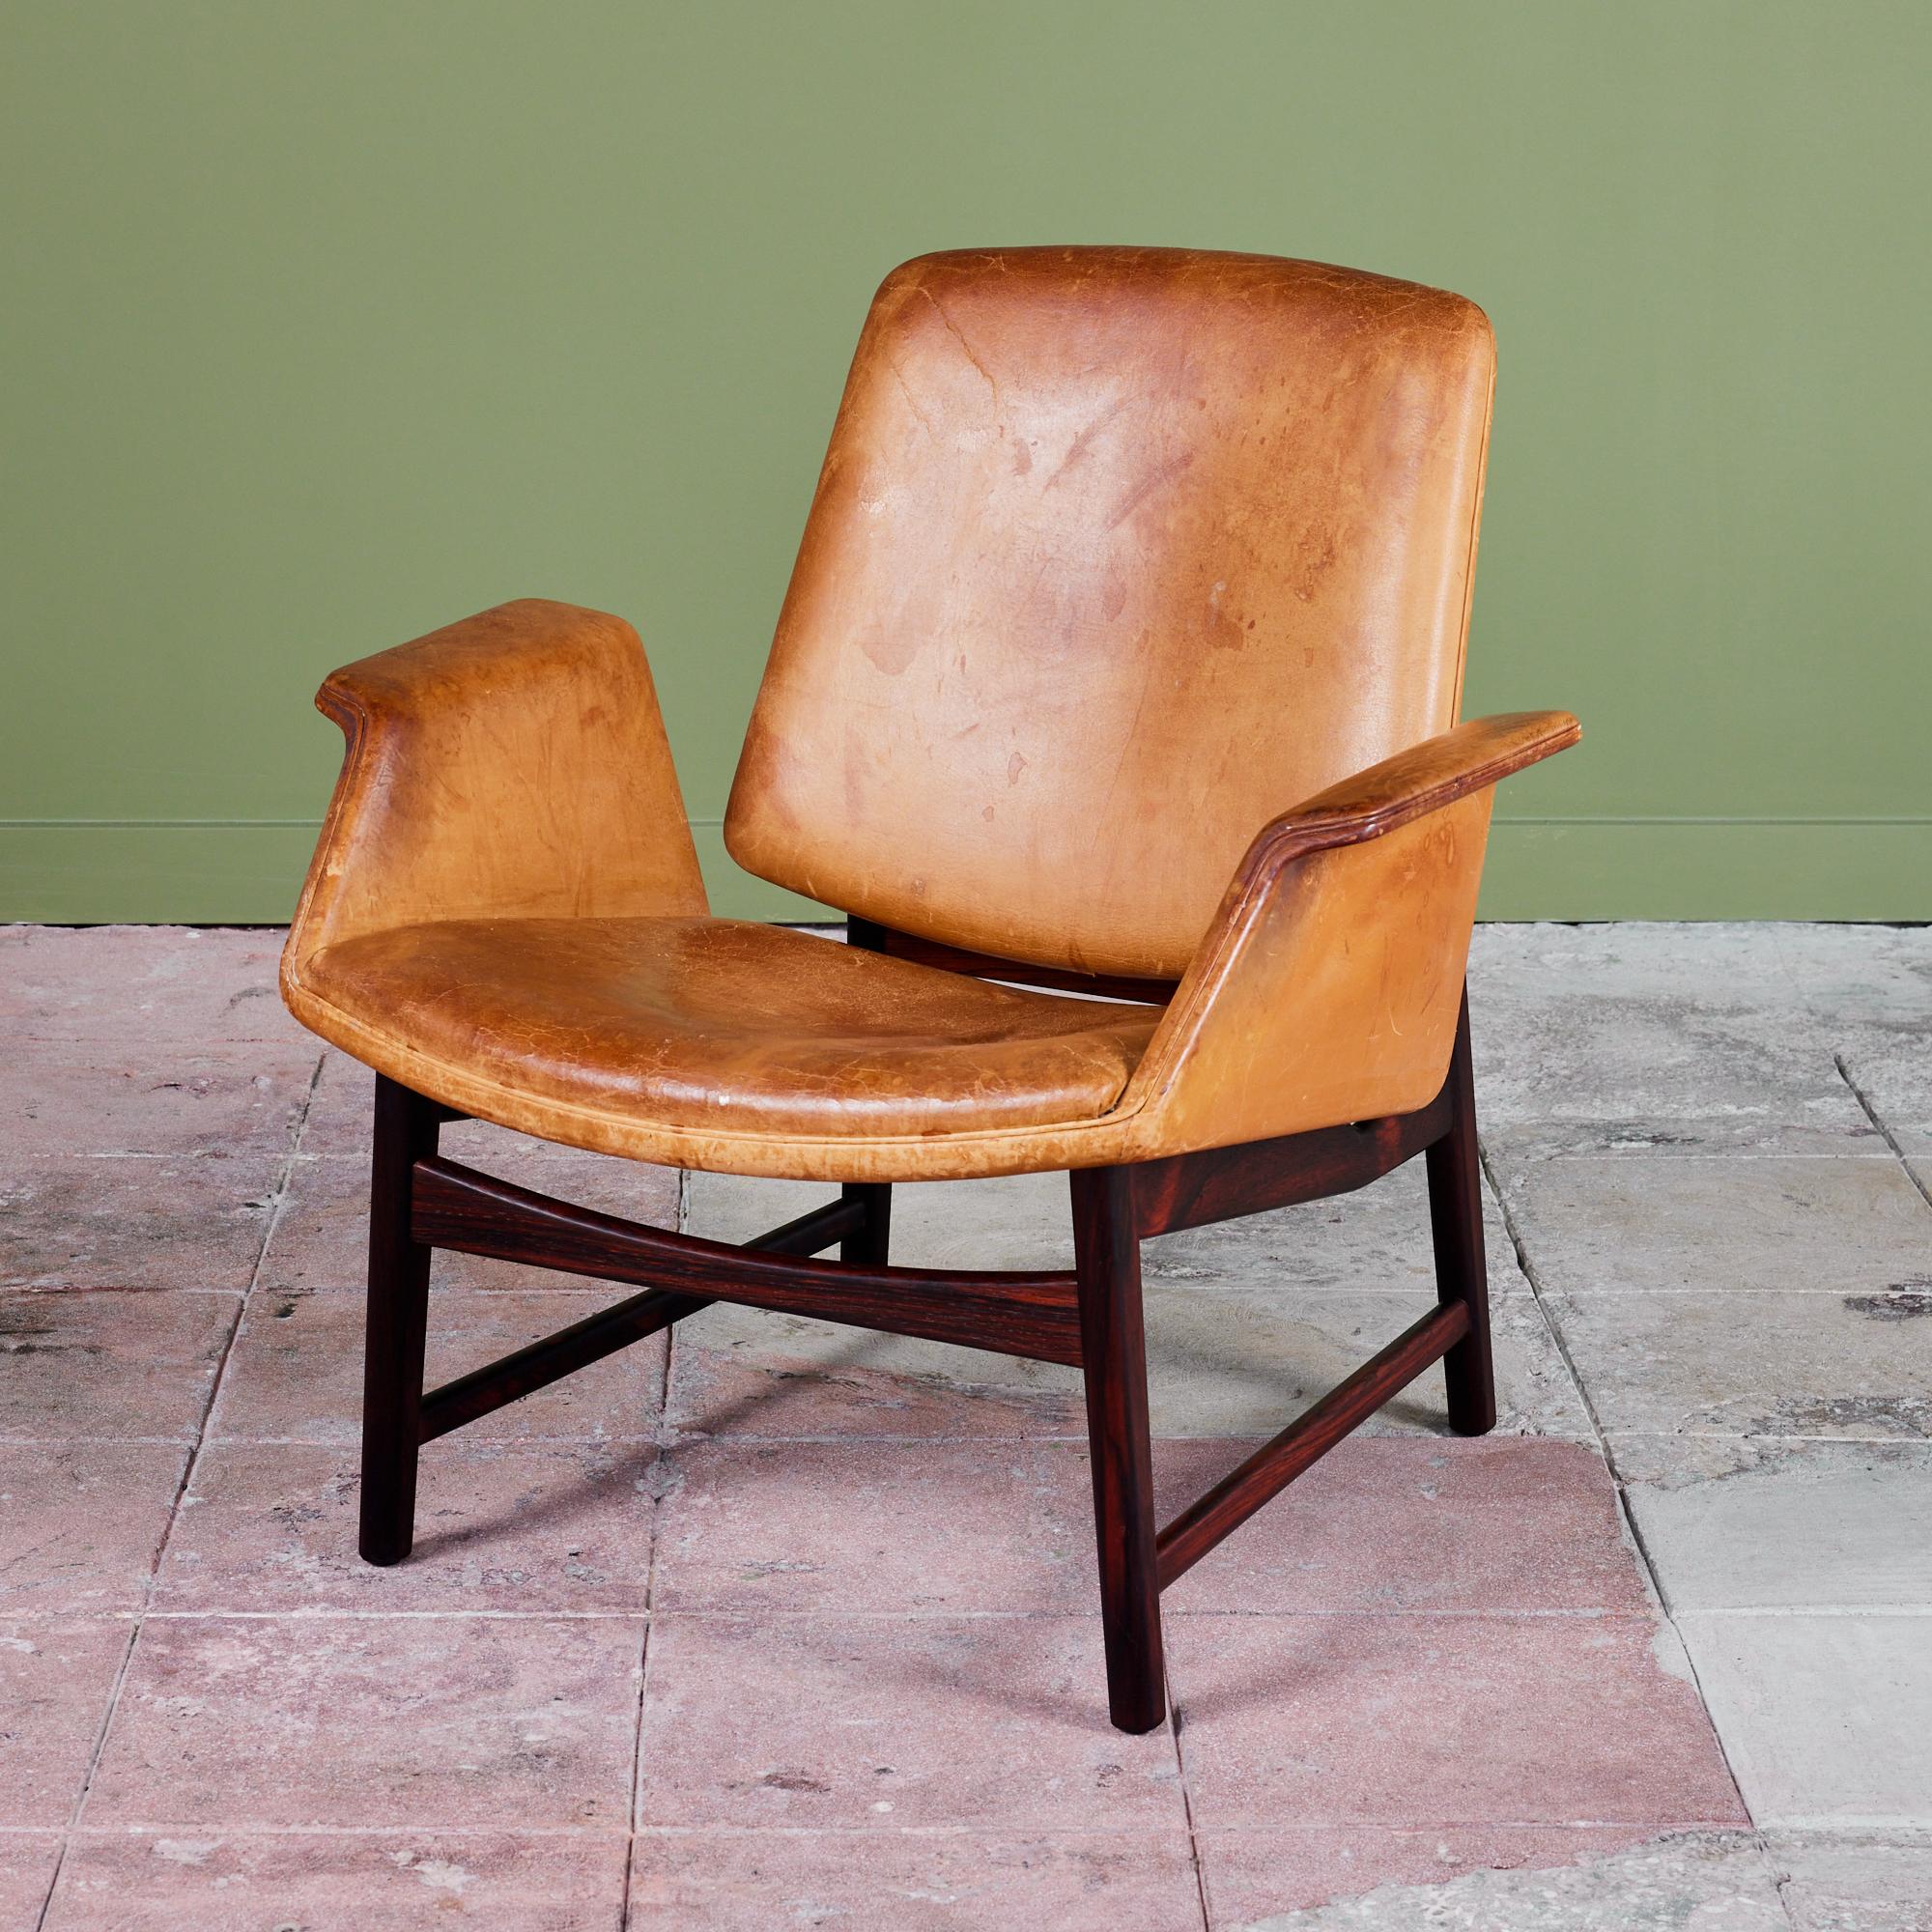 Designed in 1958 by Danish designer Illum Wikkelsø for Aarhus, this lounge chair features the original leather upholstery and stunning rosewood frame. The model 451 lounge chair's frame is wrapped in a beautiful patinated cognac leather with a wide